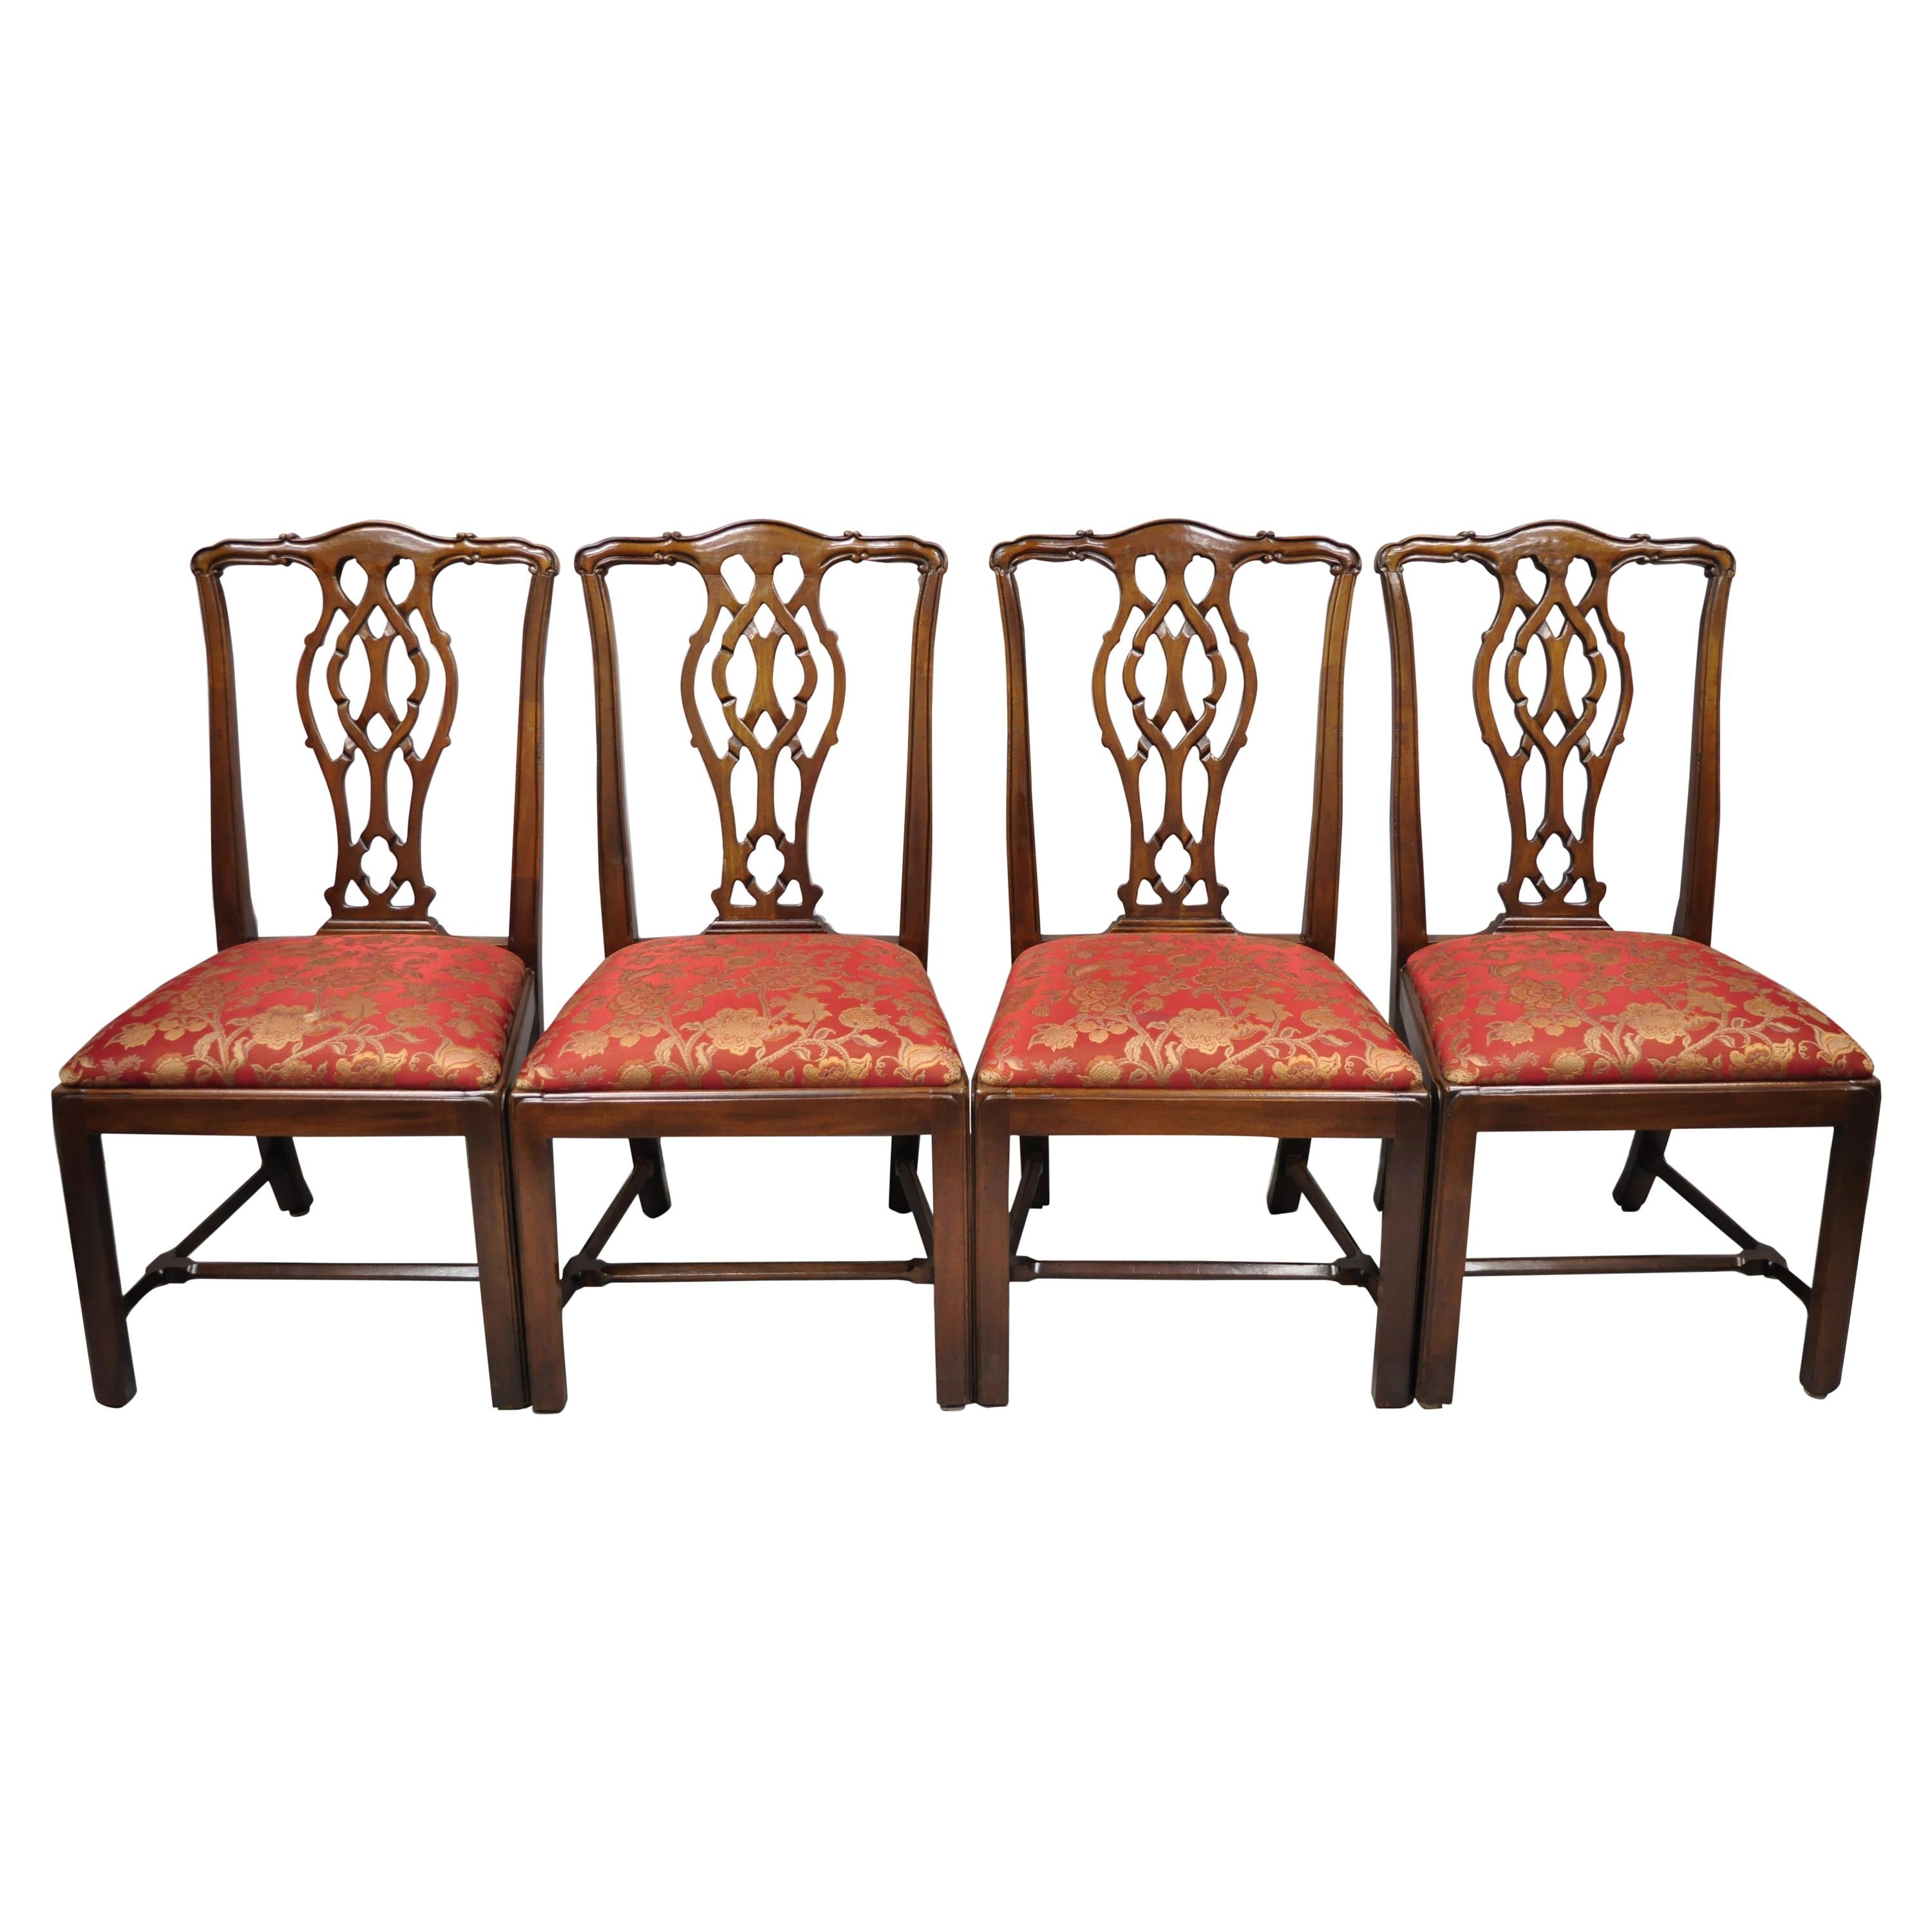 Set of 4 Mahogany Chippendale Style Dining Side Chairs Attributed to Bernhardt